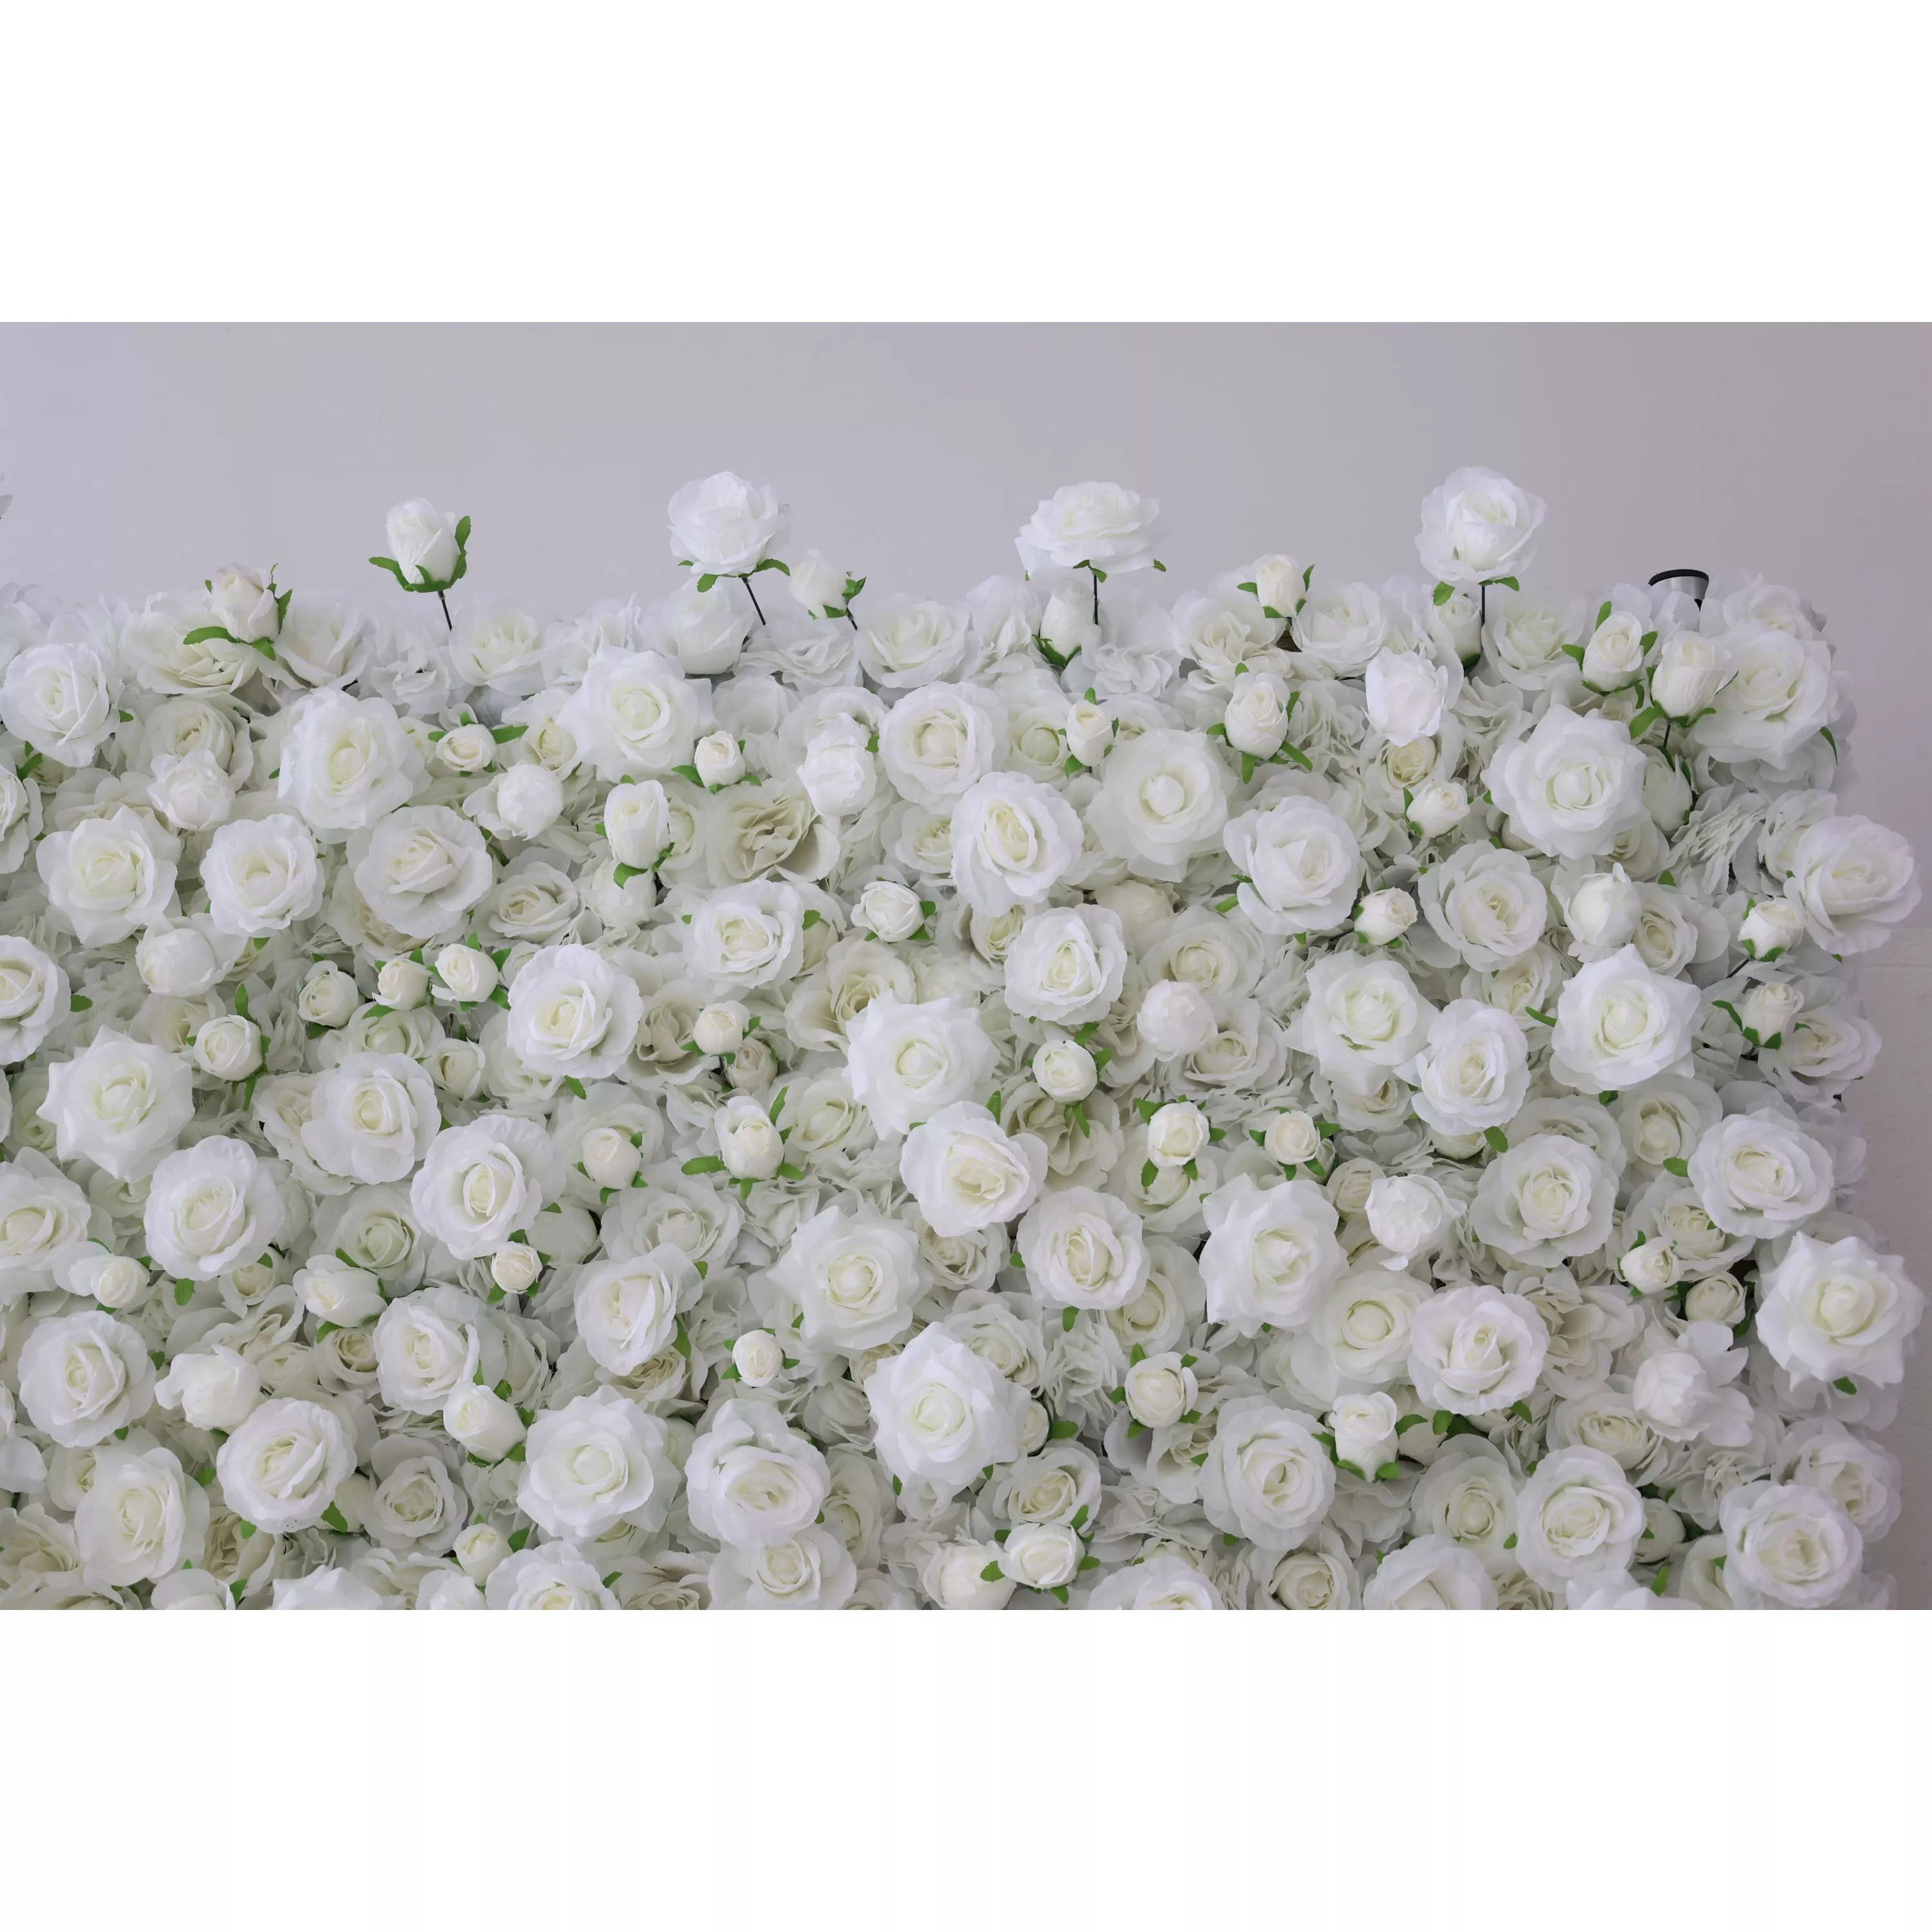 ValarFlowers Artificial Floral Wall Backdrop: Whispering Whites: A Serene Sea of Snowy Blossoms-VF-283